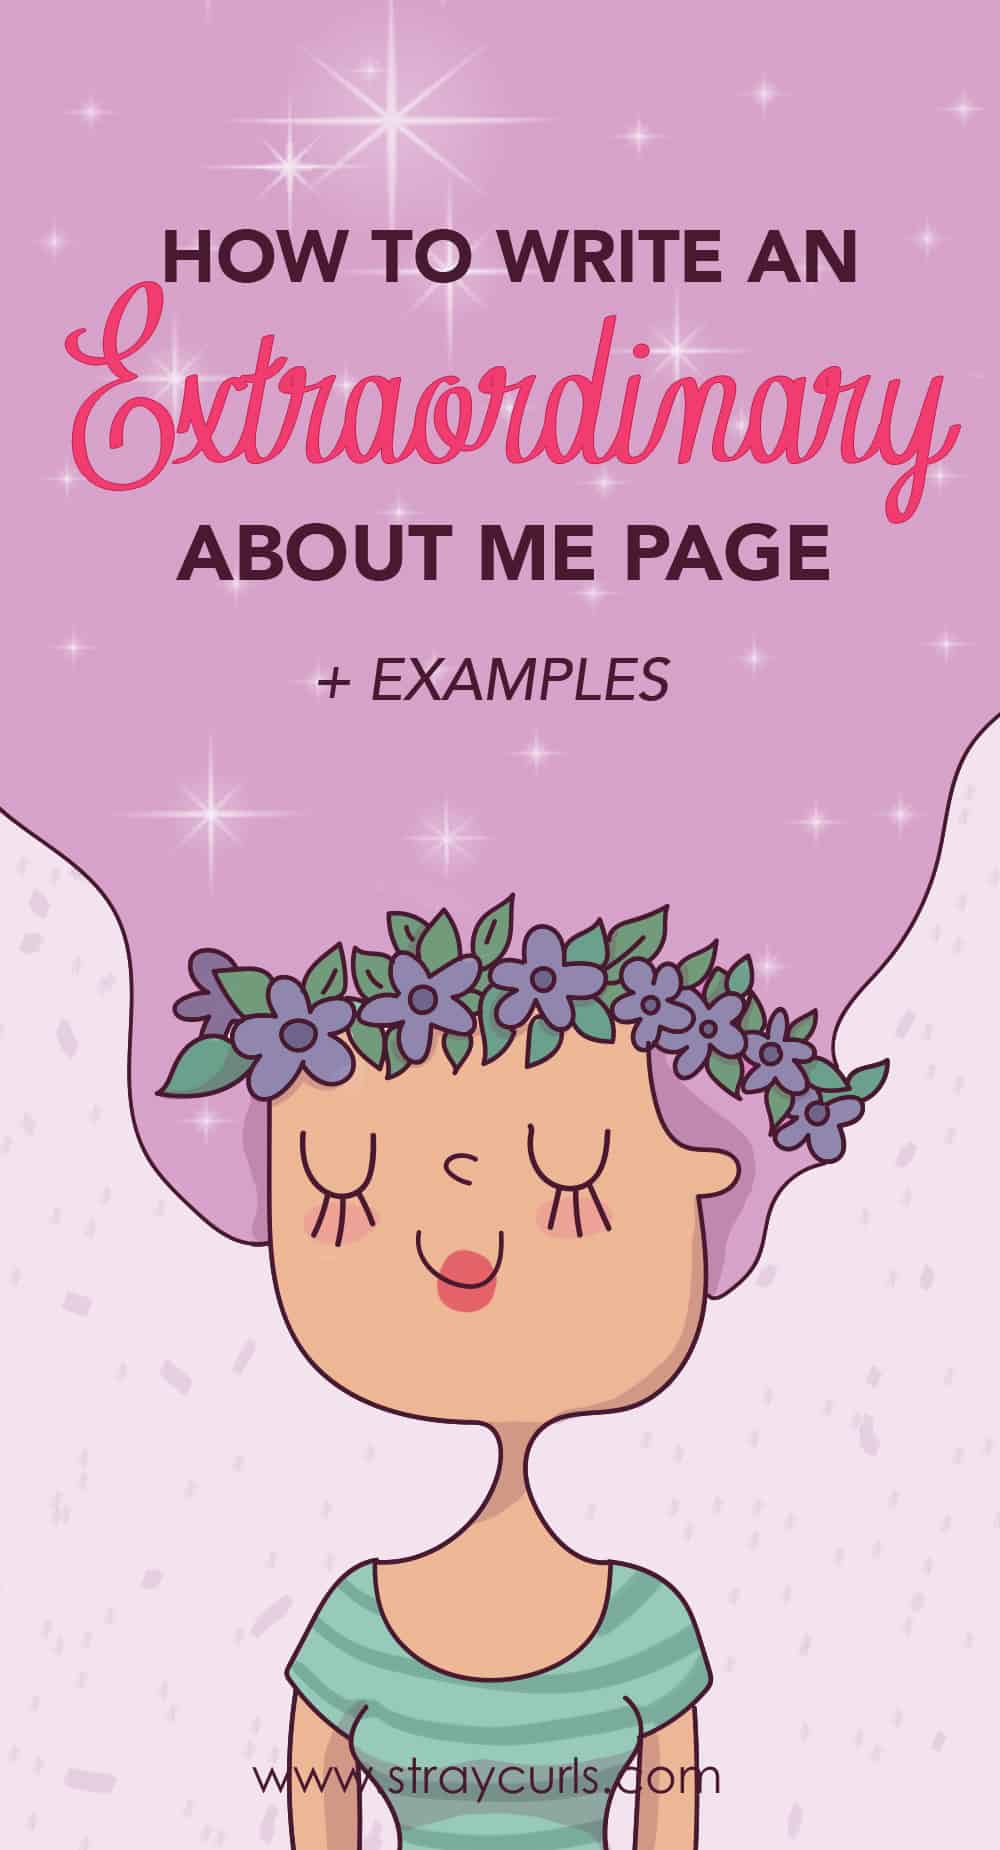 Learn exactly why and how to write an extraordinary About Me page for your Blog with these simple tips. Examples and screenshots are included!